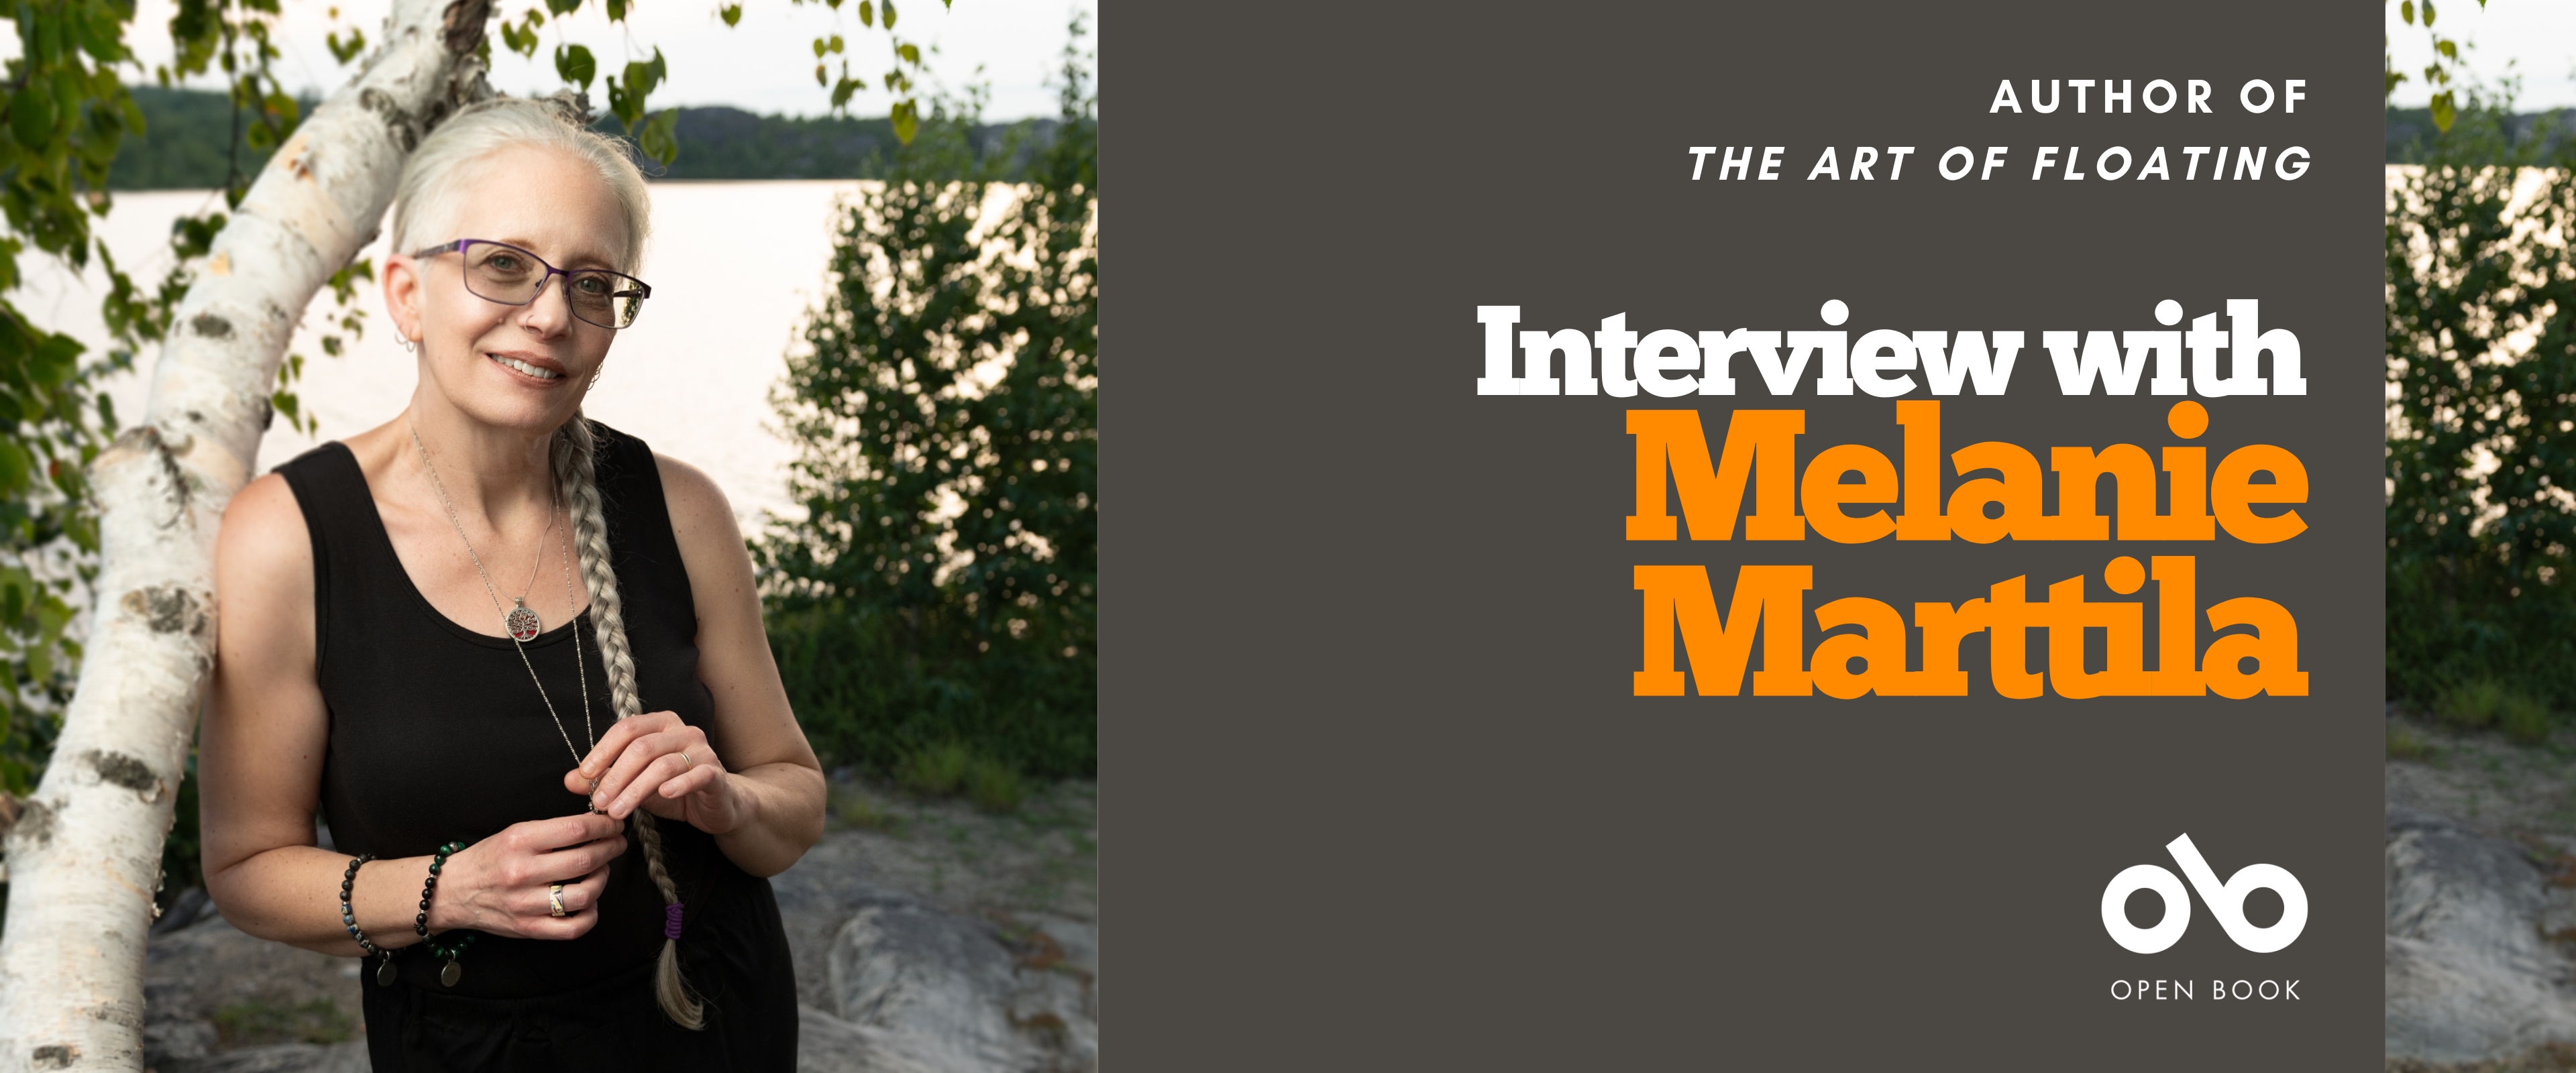 Interview with Melanie Marttila banner. Background image of the author, woman in black dress with grey hair and leaning on a birch tree near to baywater. Grey section to the right with text overlaid and the Open Book logo.